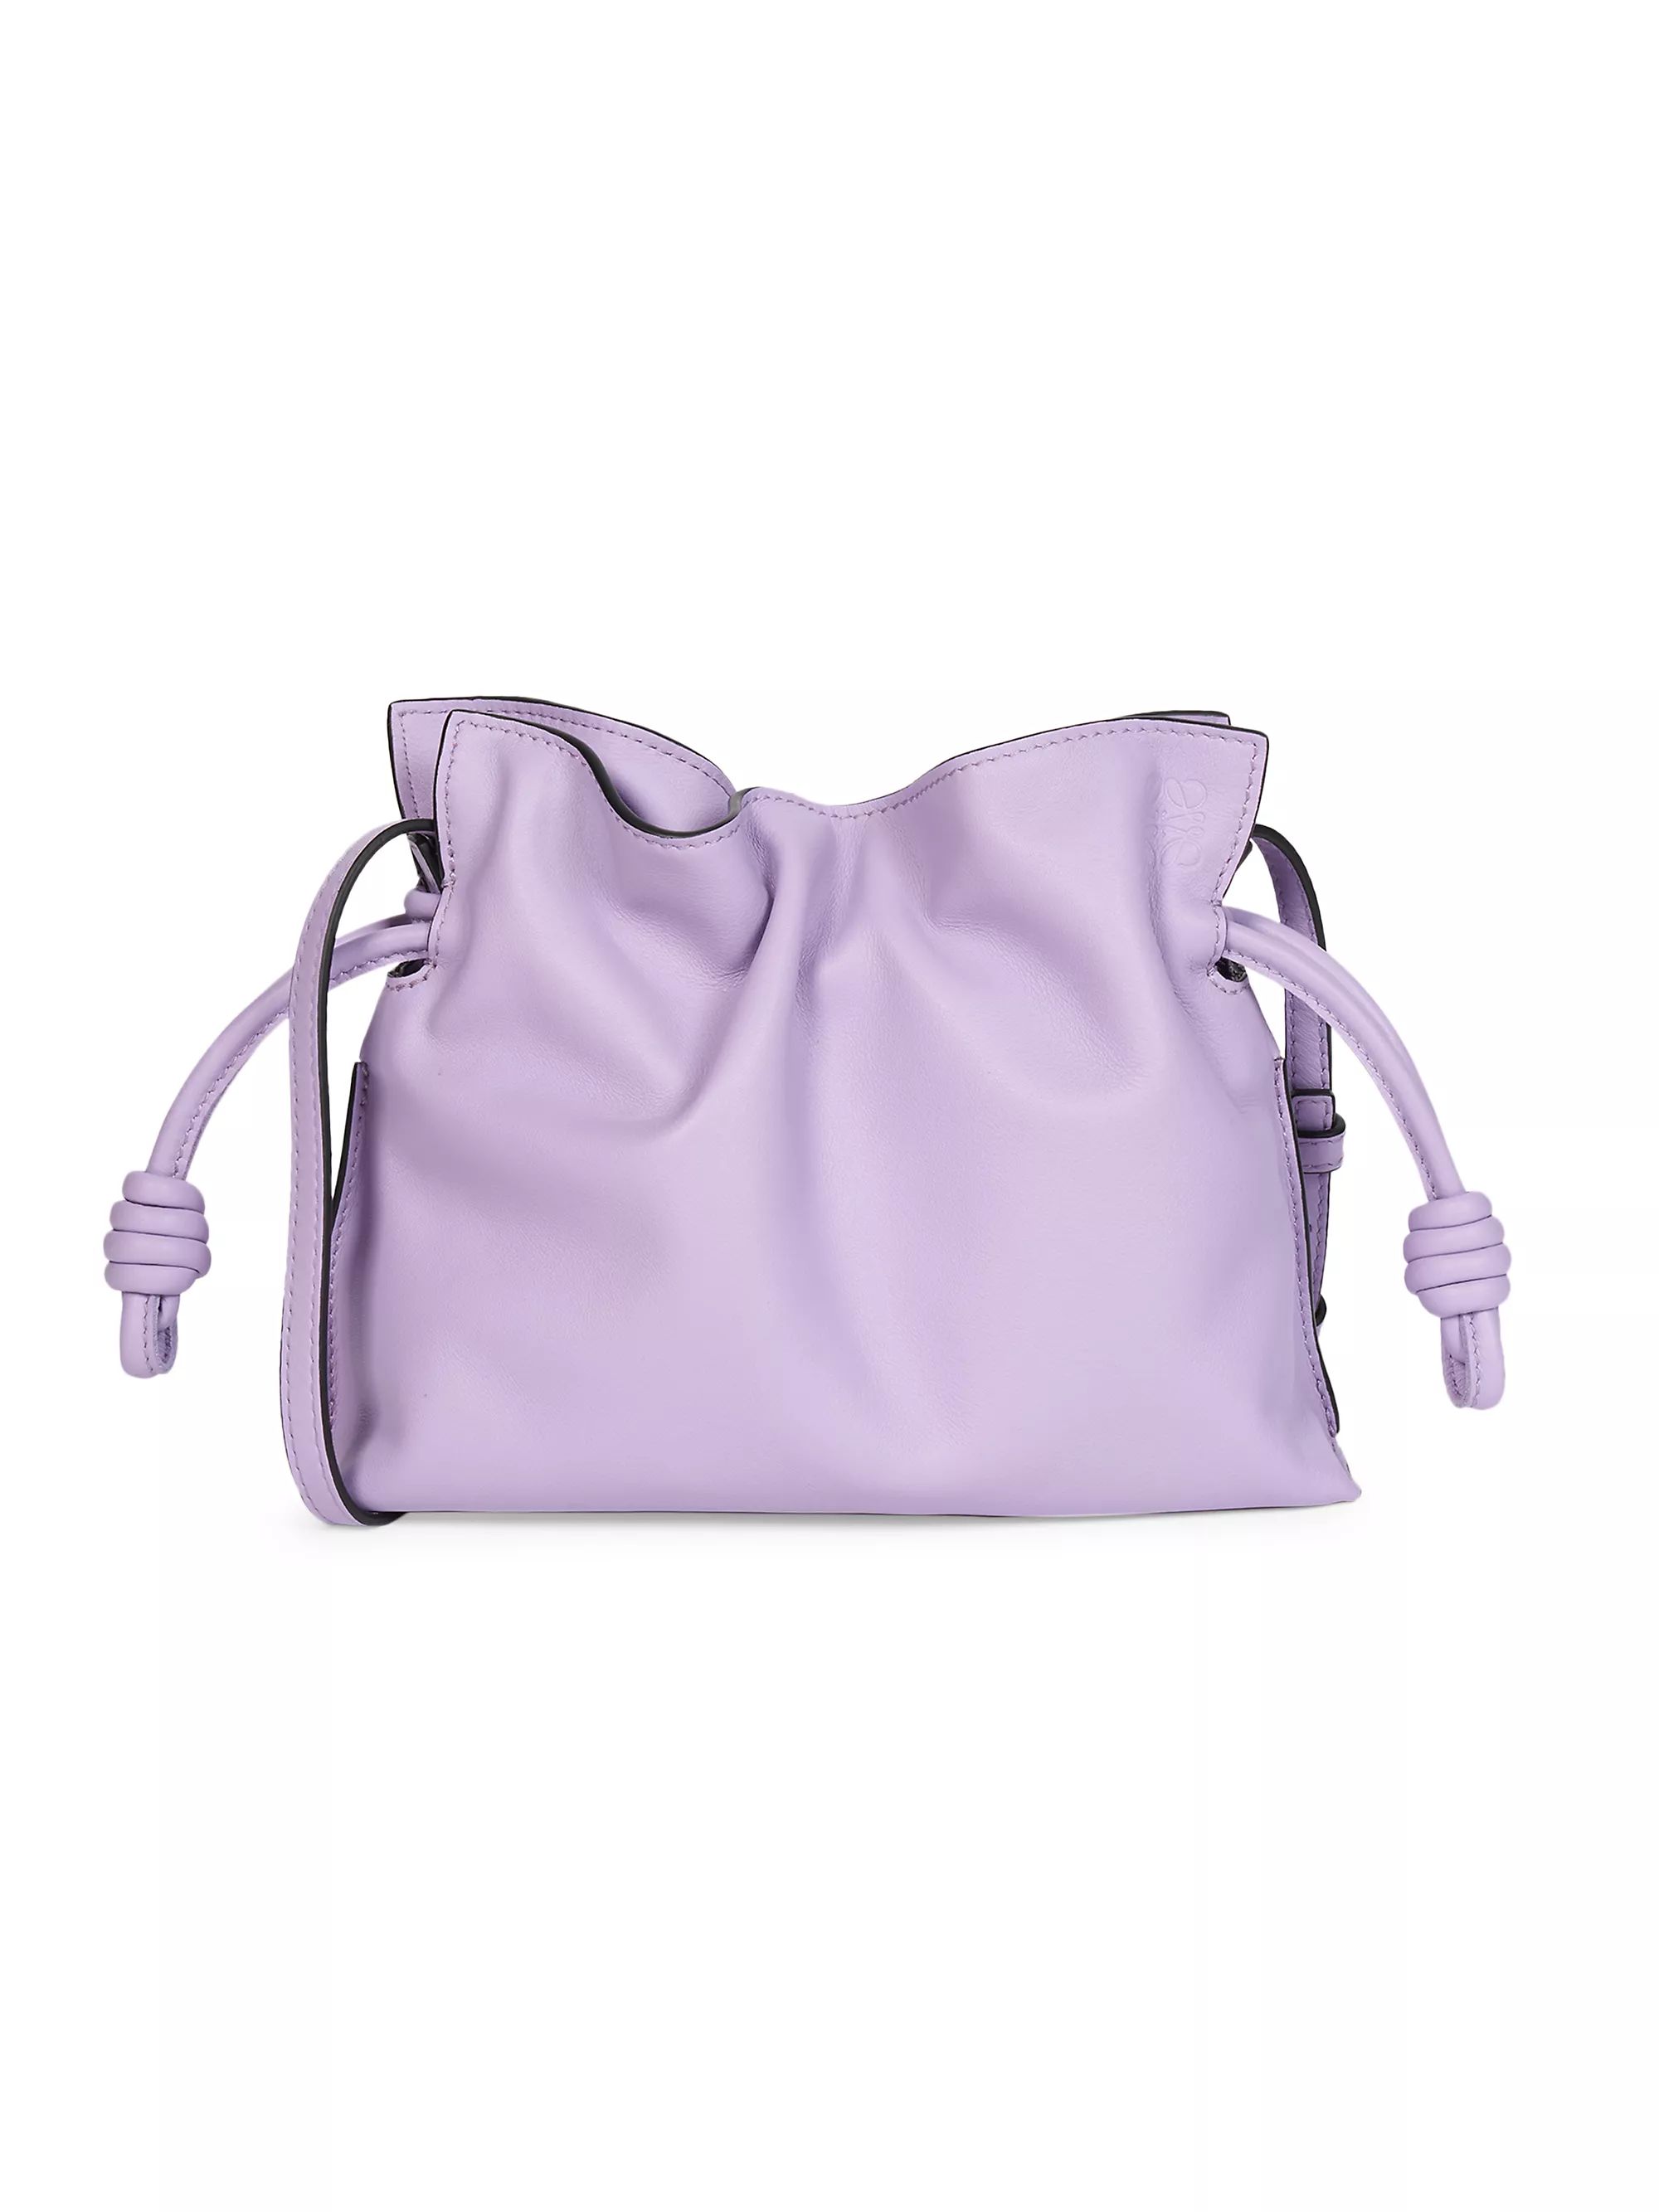 Shop By CategoryClutches & PouchesLOEWEFlamenco Mini Leather ClutchRating: 1 out of 5 stars1$2,10... | Saks Fifth Avenue